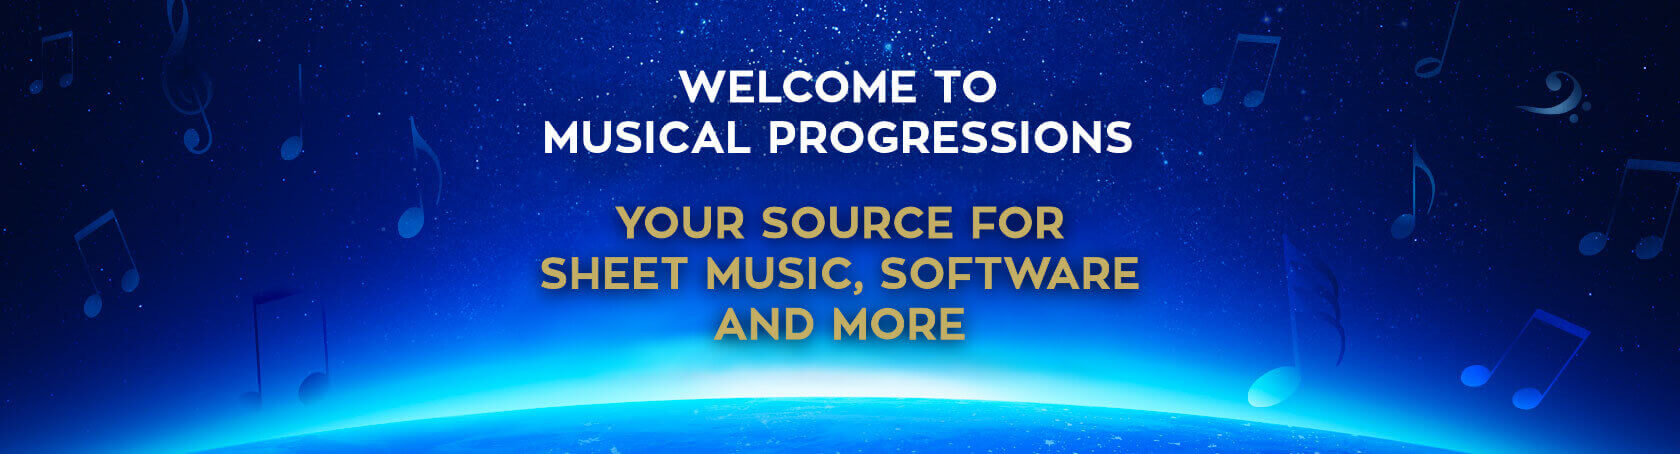 Welcome to Musical Progressions website.